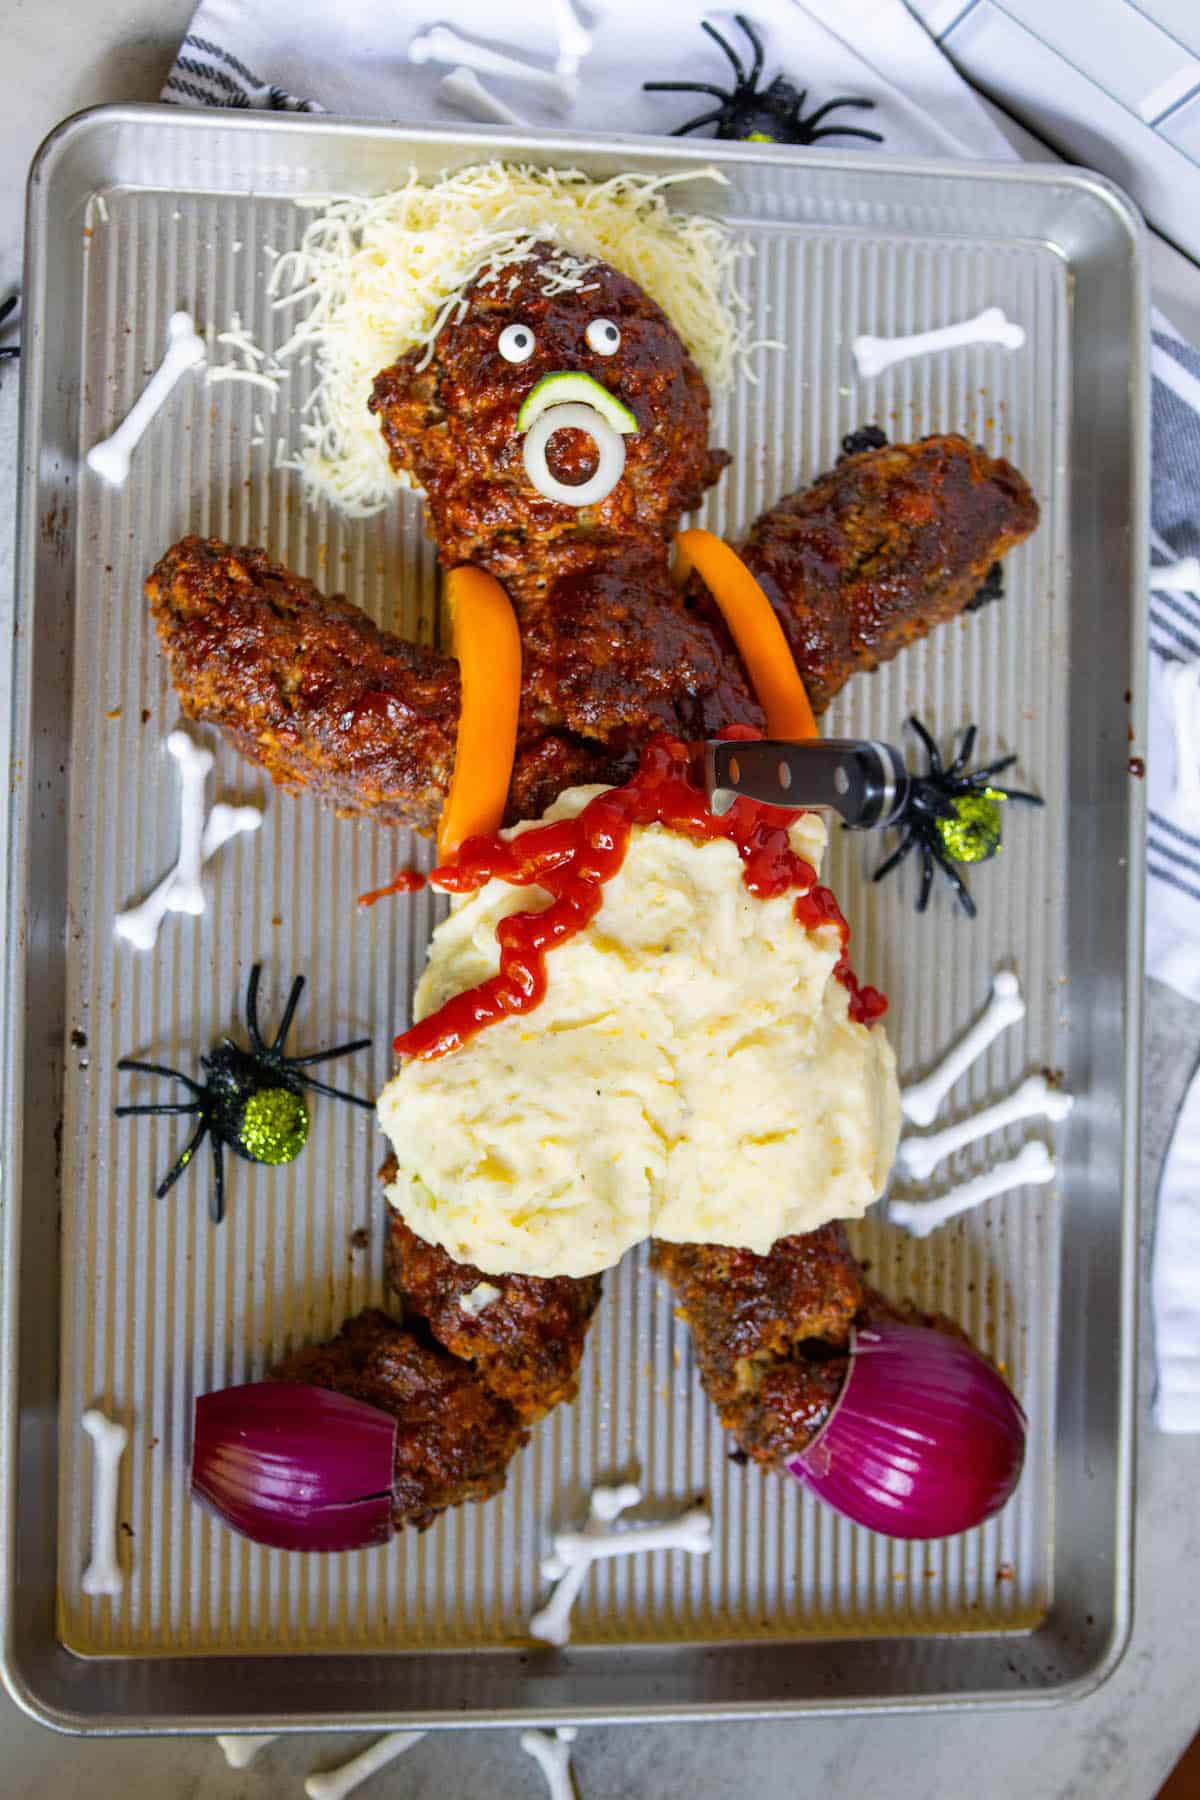 A metal baking sheet with a gory Halloween costume resembling a dead man meatloaf.